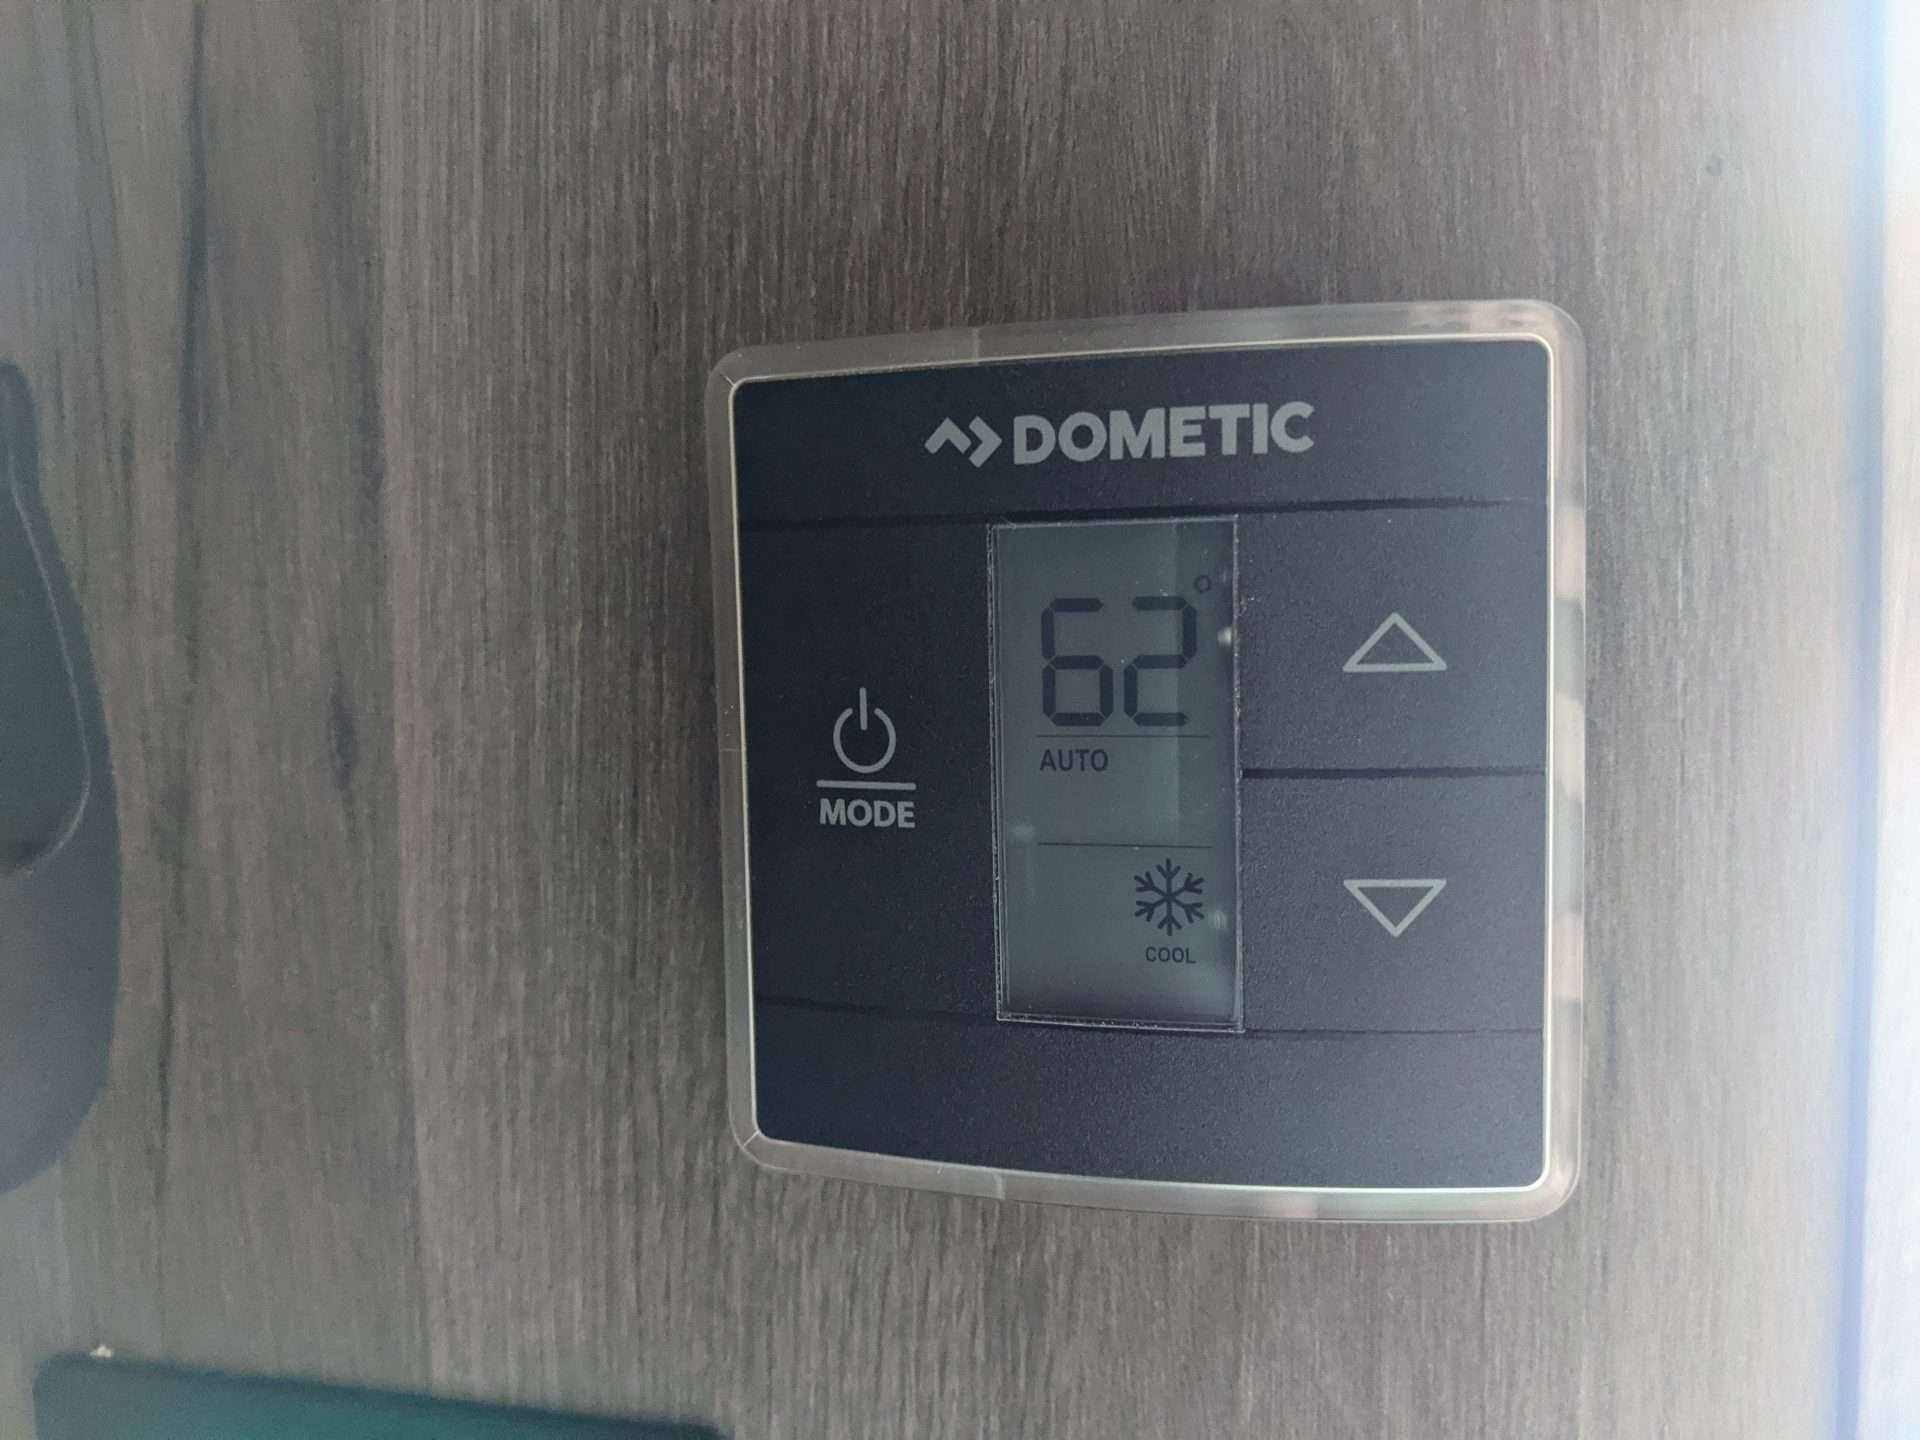 Dometic thermostat set at 62 degrees in RV.